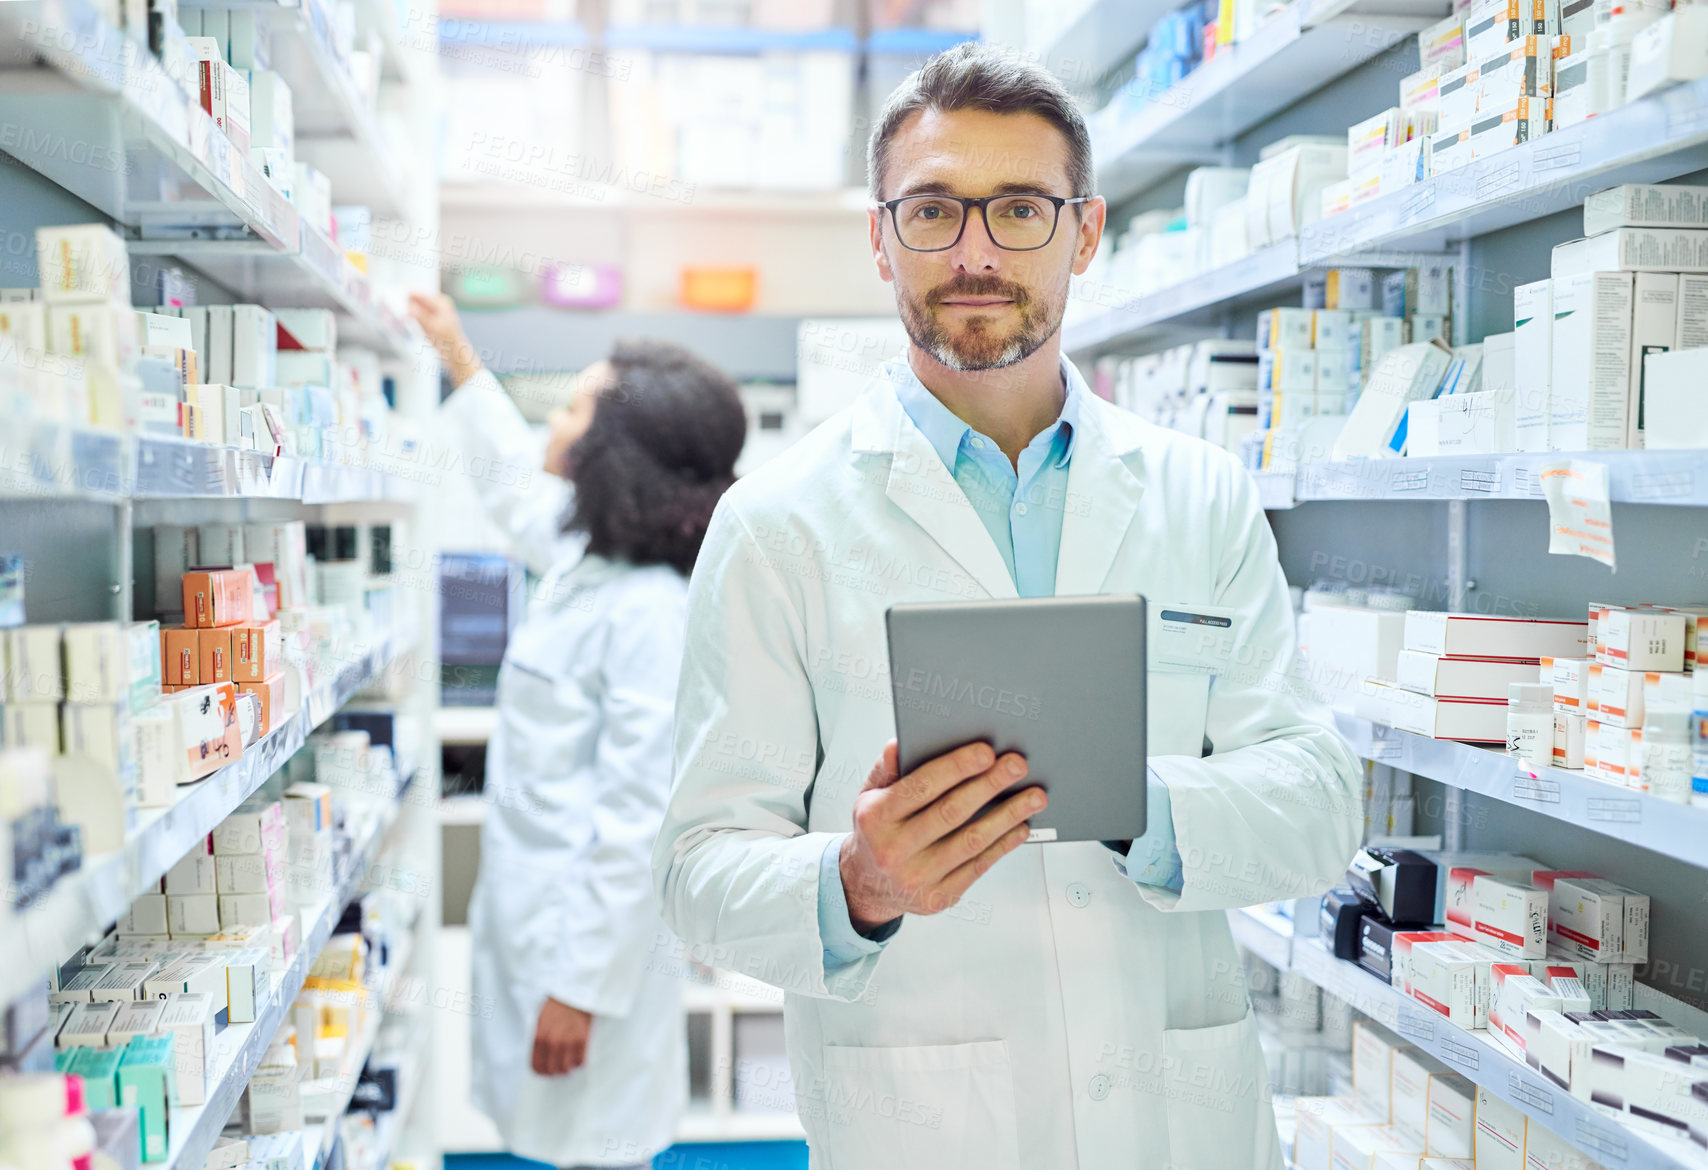 Buy stock photo Shot of a mature man using a digital tablet to do inventory in a pharmacy